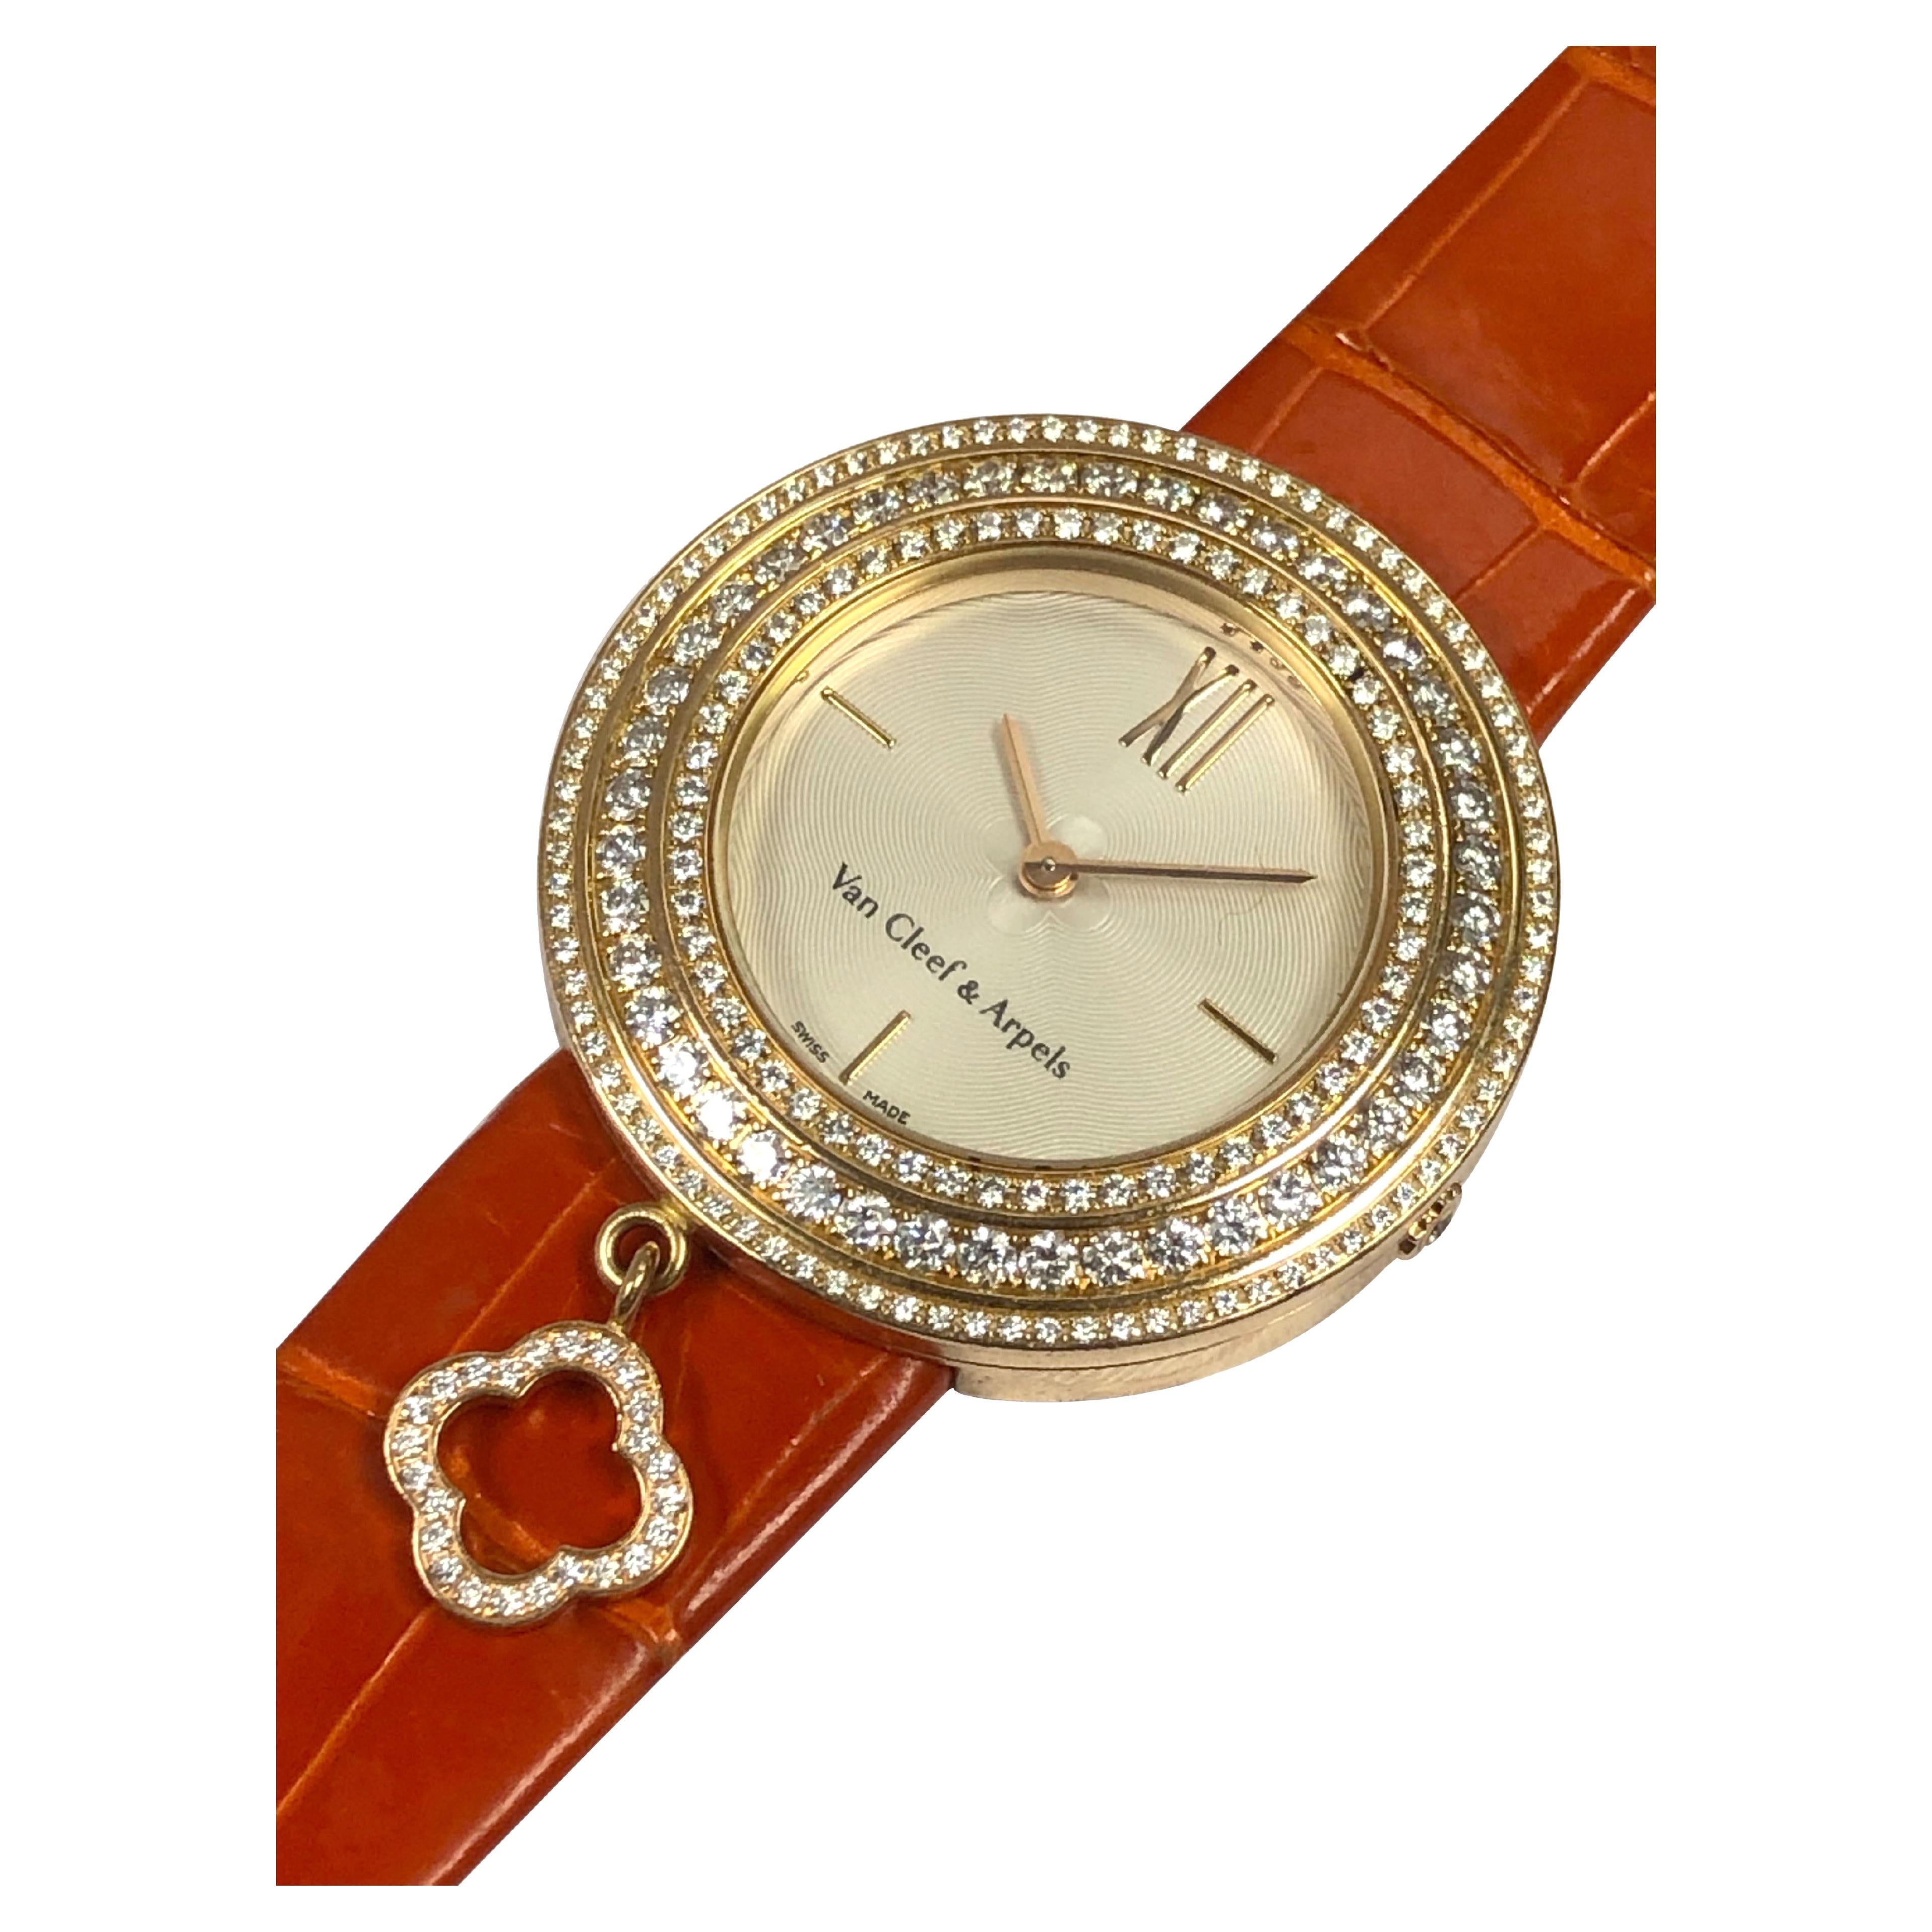 Van Cleef & Arpels "Charms" large Diamond and Rose Gold Wrist Watch For Sale